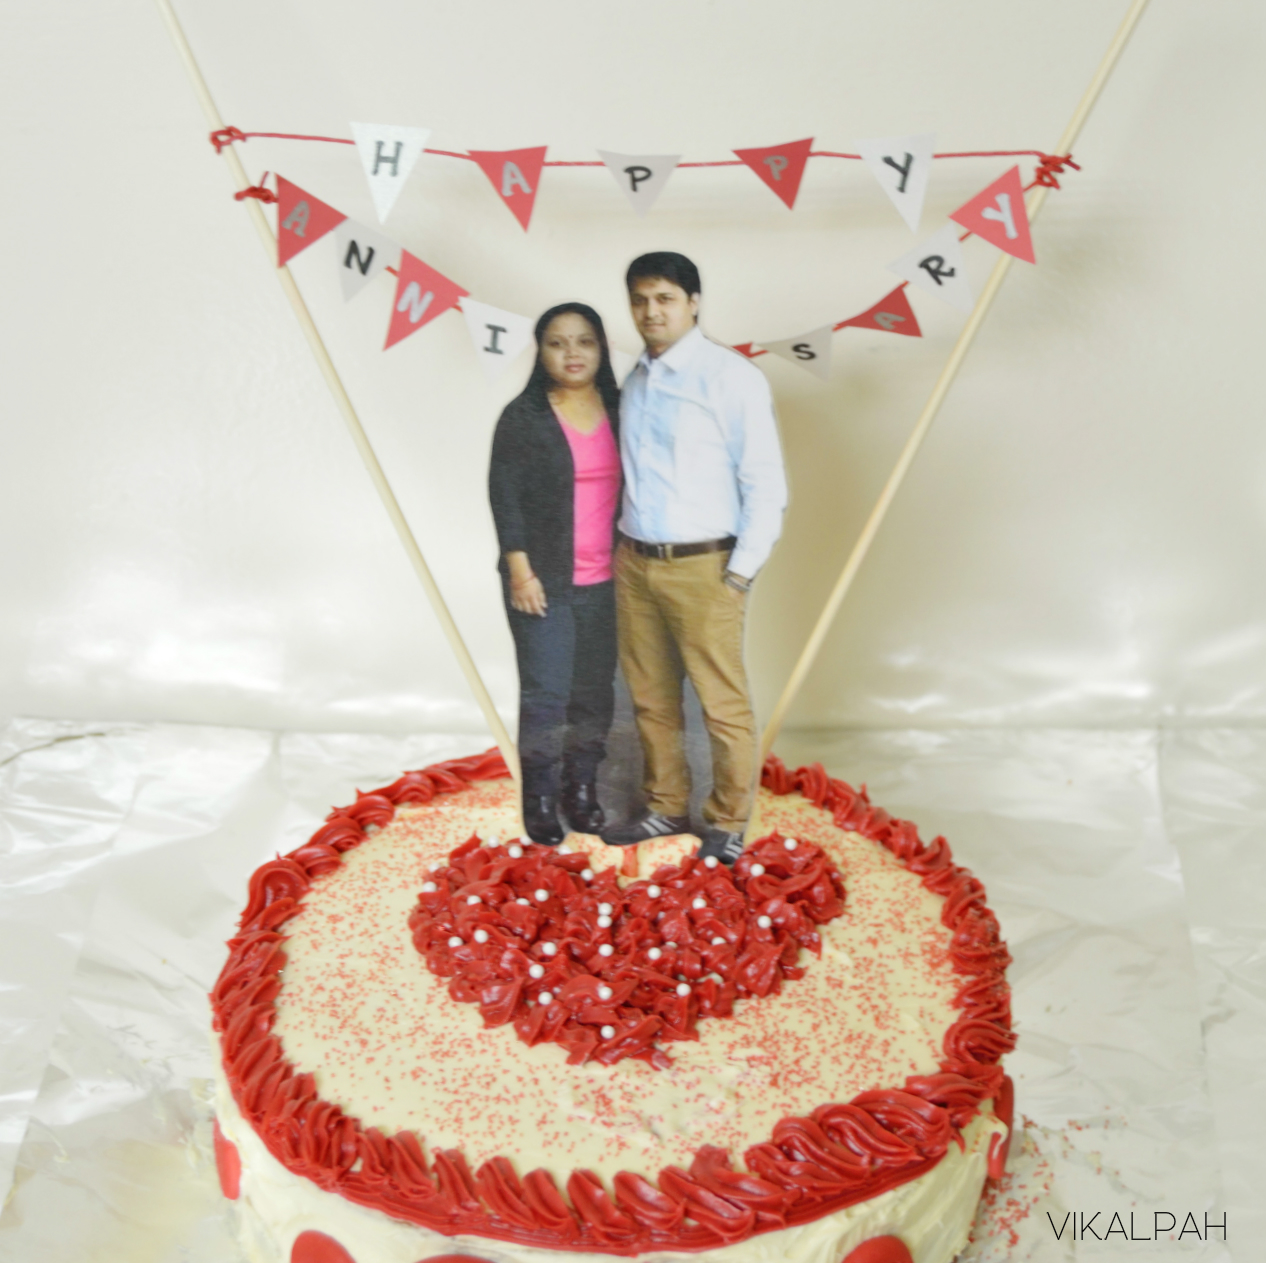 How to Print a Custom Picture or Design for a Cake at Home?